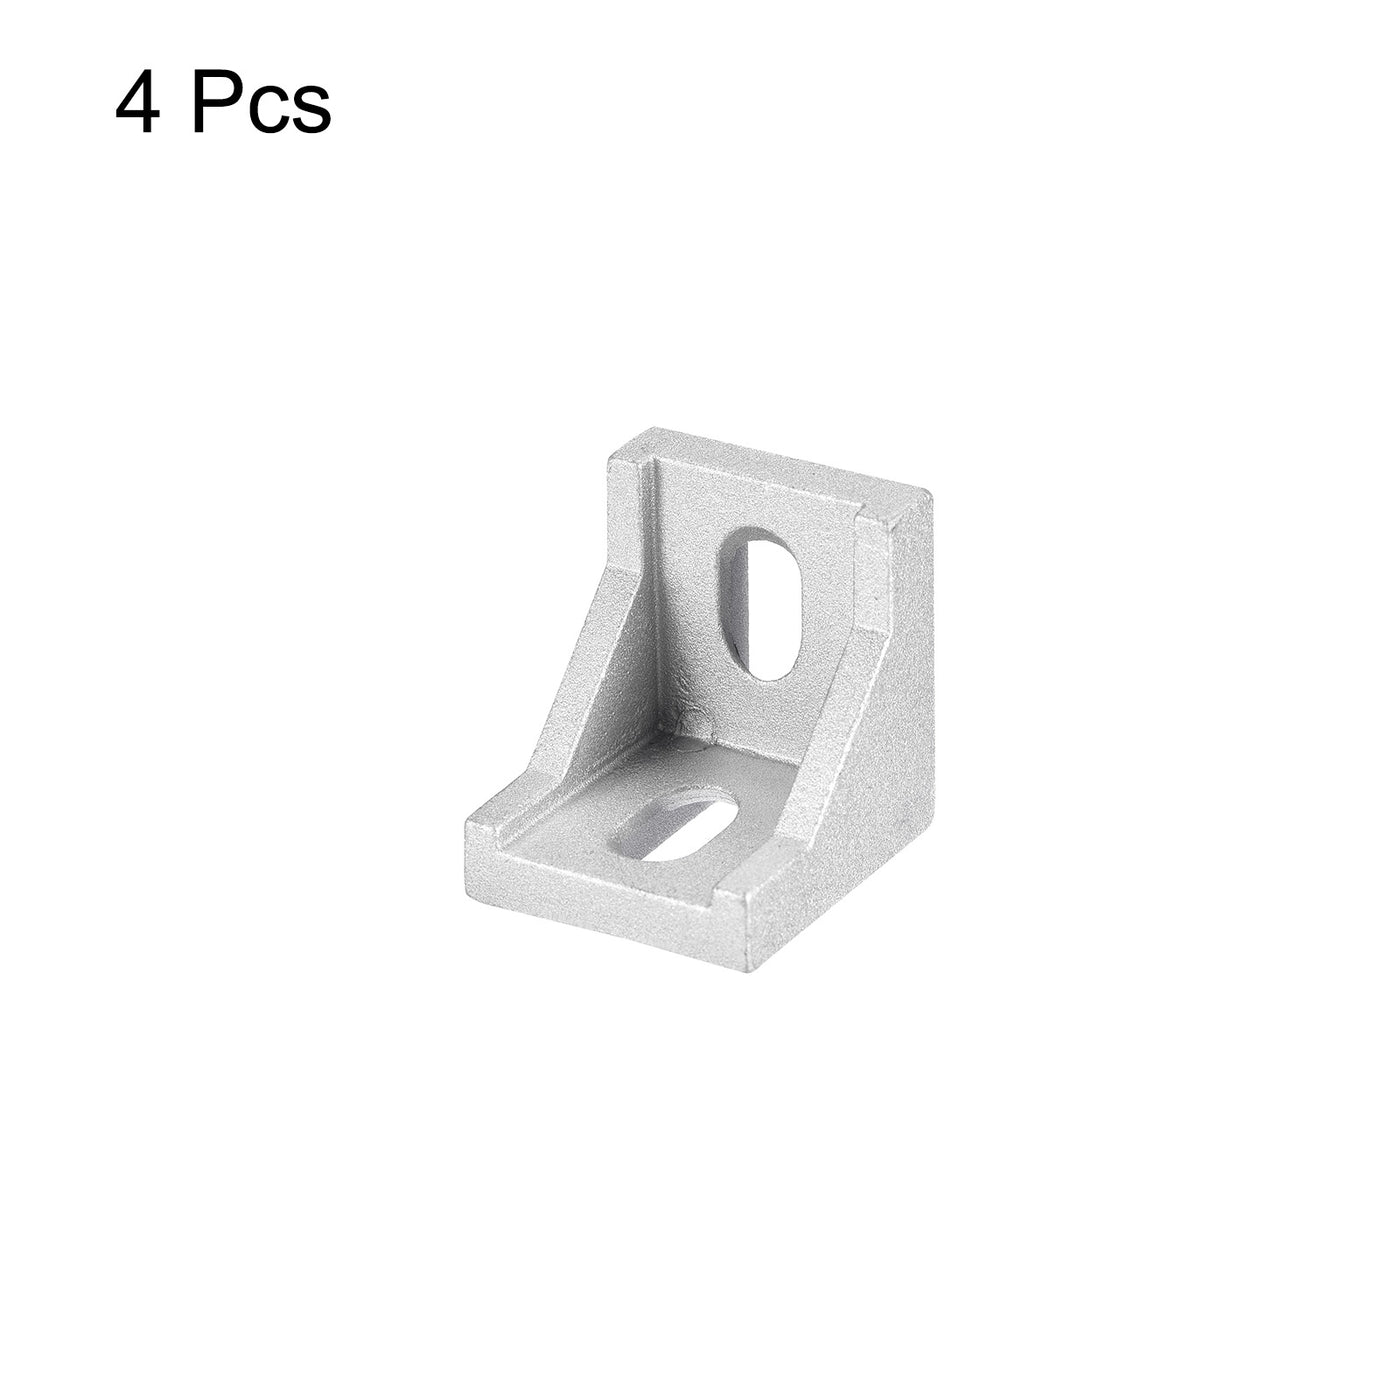 uxcell Uxcell 4Pcs Inside Corner Bracket Gusset, 38x38x35mm 4040 Thicken Angle Connectors for 4040/4080 Series Aluminum Extrusion Profile Silver